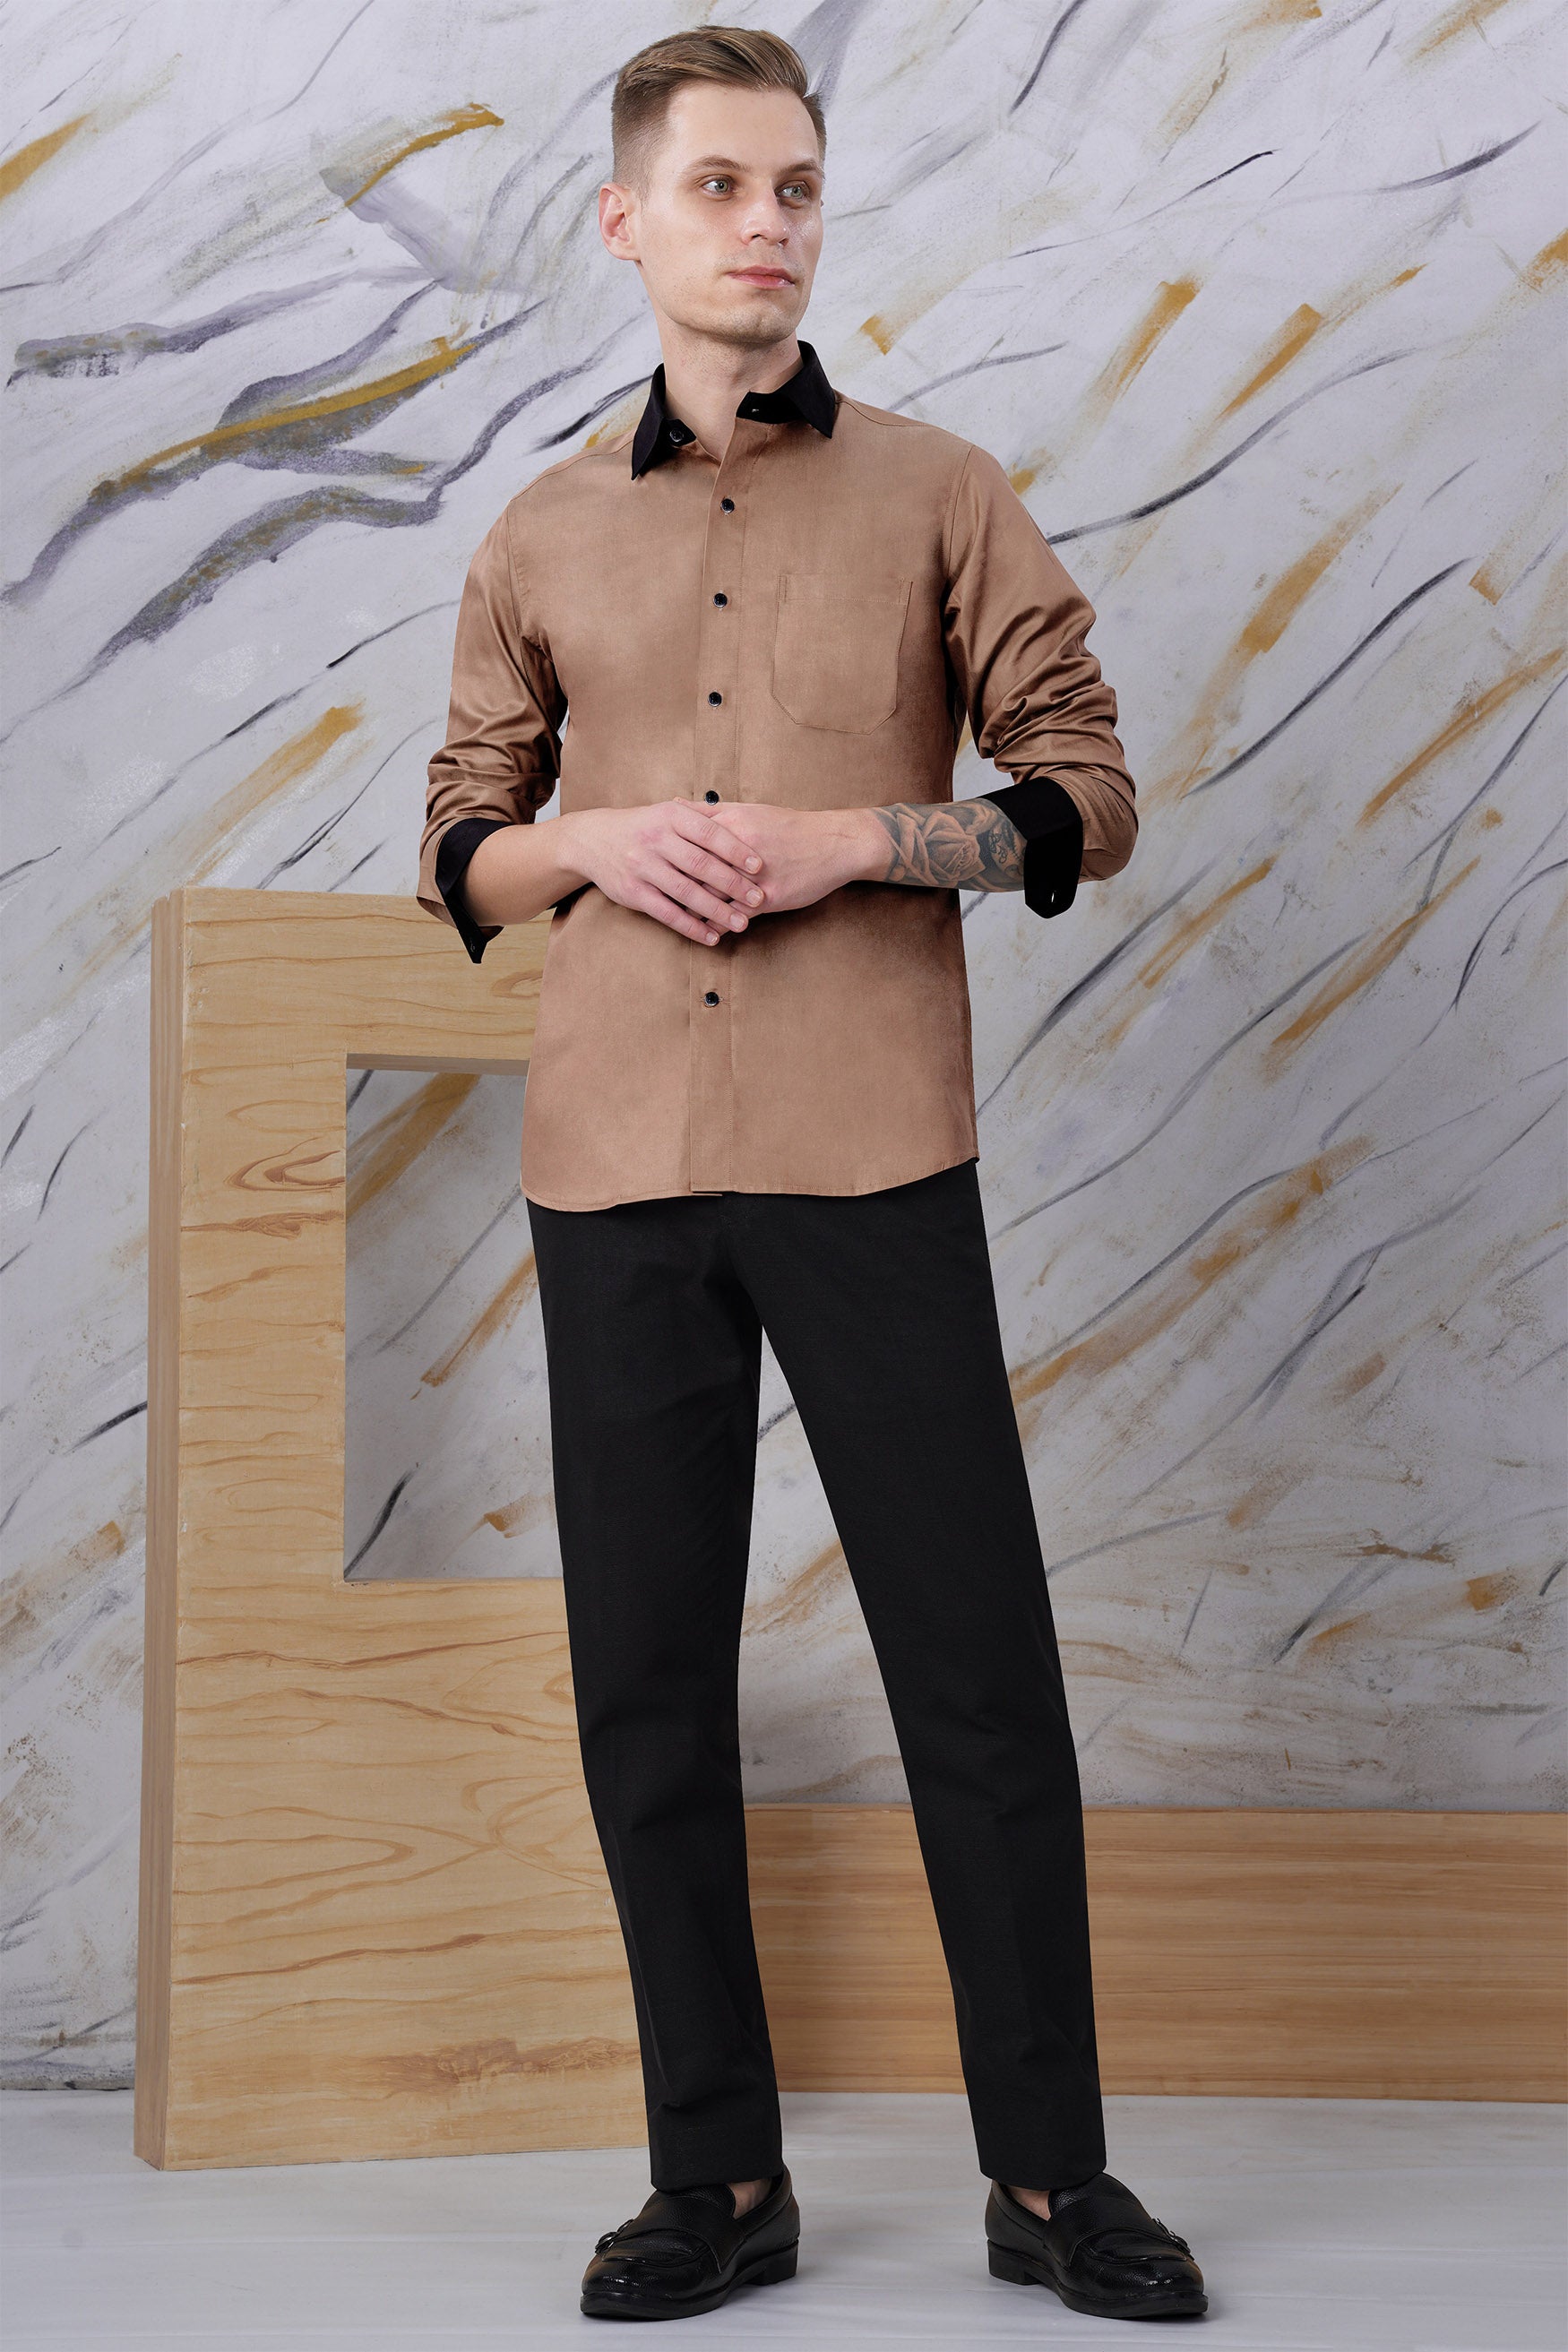 Pharlap Brown with Black Cuffs and Collar Chambray Shirt 11675-BCC-BLK-38, 11675-BCC-BLK-H-38, 11675-BCC-BLK-39, 11675-BCC-BLK-H-39, 11675-BCC-BLK-40, 11675-BCC-BLK-H-40, 11675-BCC-BLK-42, 11675-BCC-BLK-H-42, 11675-BCC-BLK-44, 11675-BCC-BLK-H-44, 11675-BCC-BLK-46, 11675-BCC-BLK-H-46, 11675-BCC-BLK-48, 11675-BCC-BLK-H-48, 11675-BCC-BLK-50, 11675-BCC-BLK-H-50, 11675-BCC-BLK-52, 11675-BCC-BLK-H-52